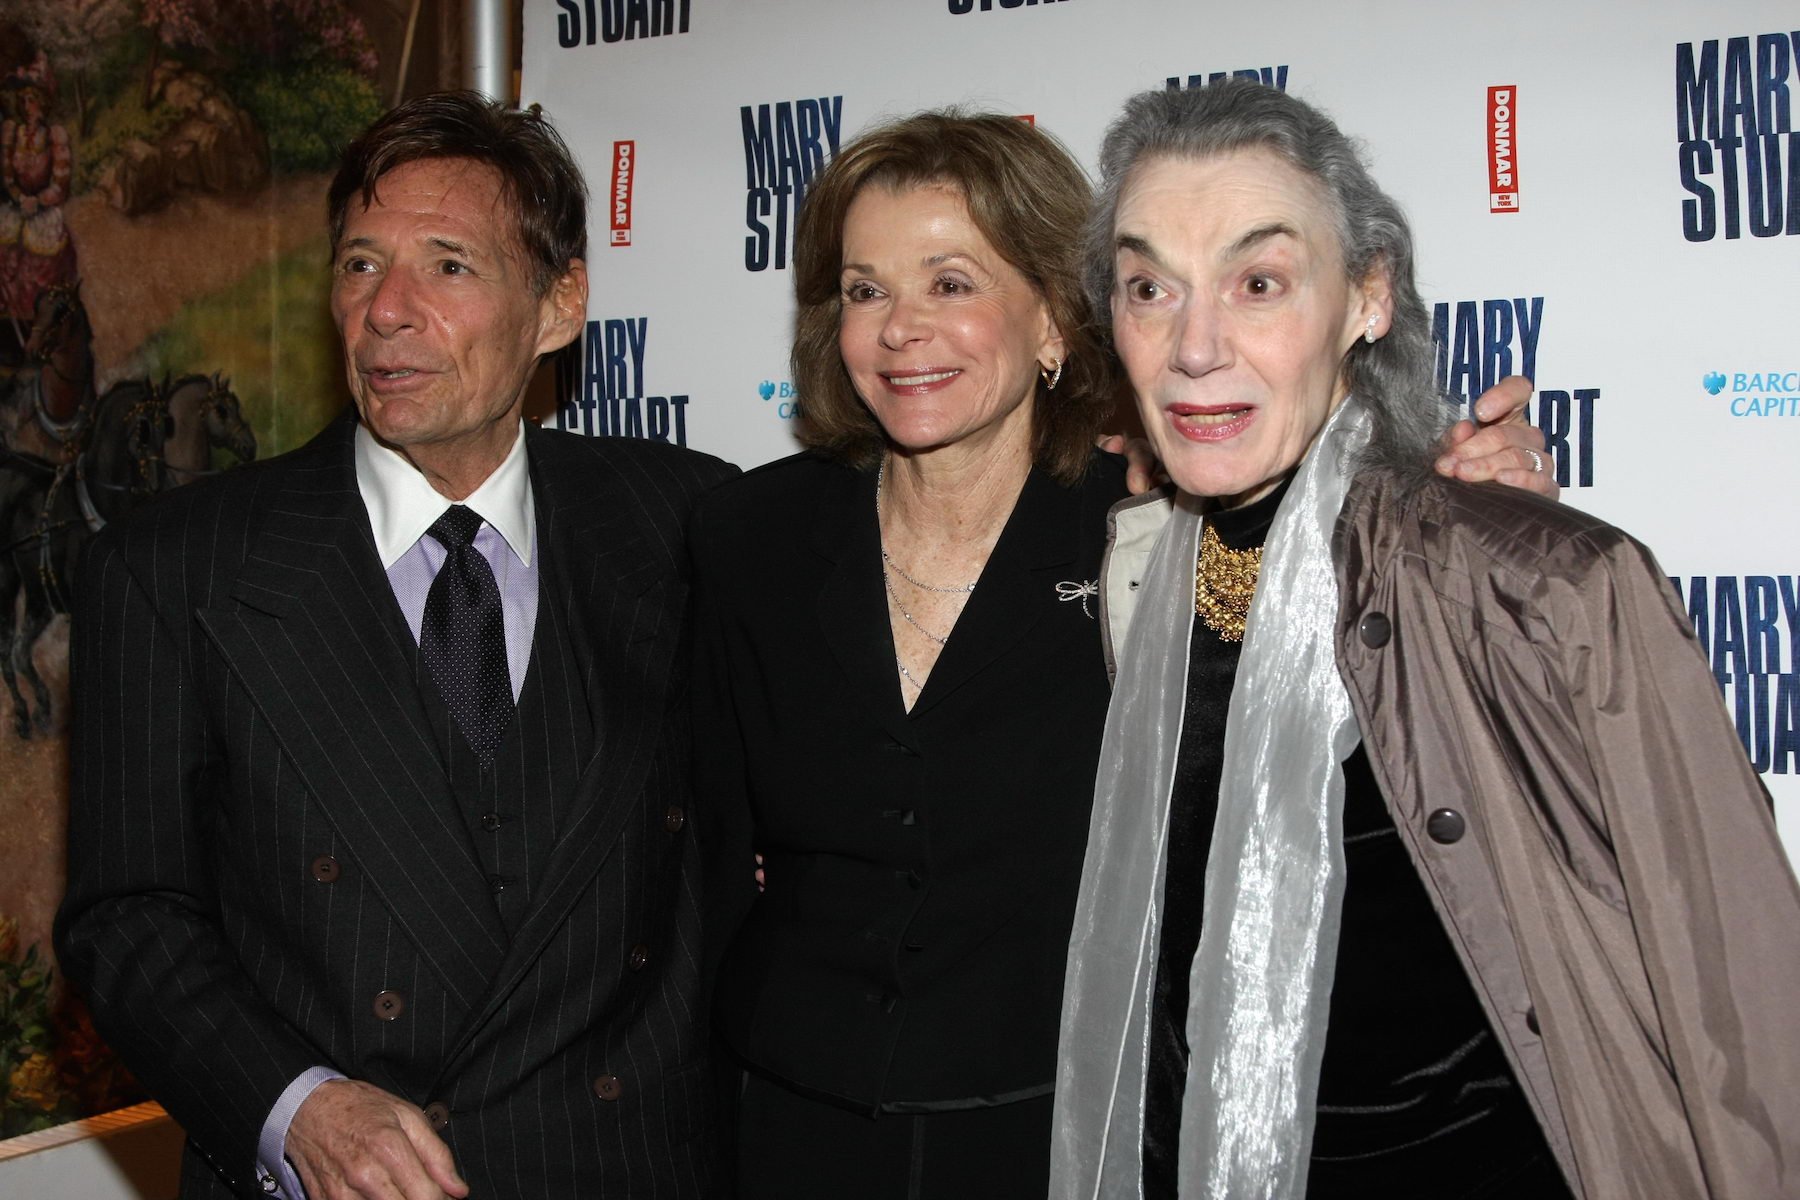 Actor Ron Liebman standing next to wife Jessica Walter from 'Arrested Development,' and Marian Seldes attending a premiere